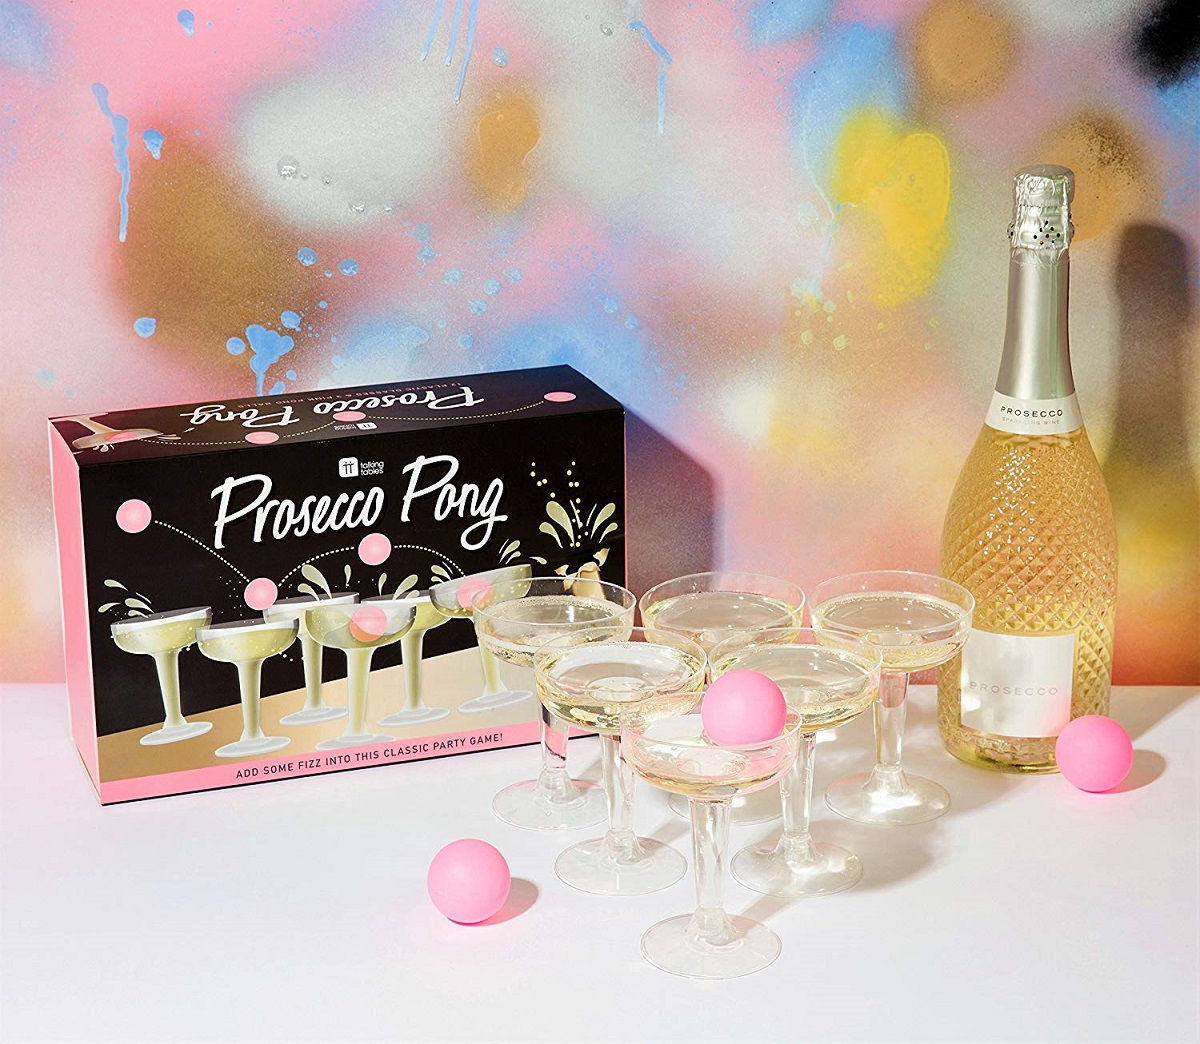 prosecco-pong-biere-pong